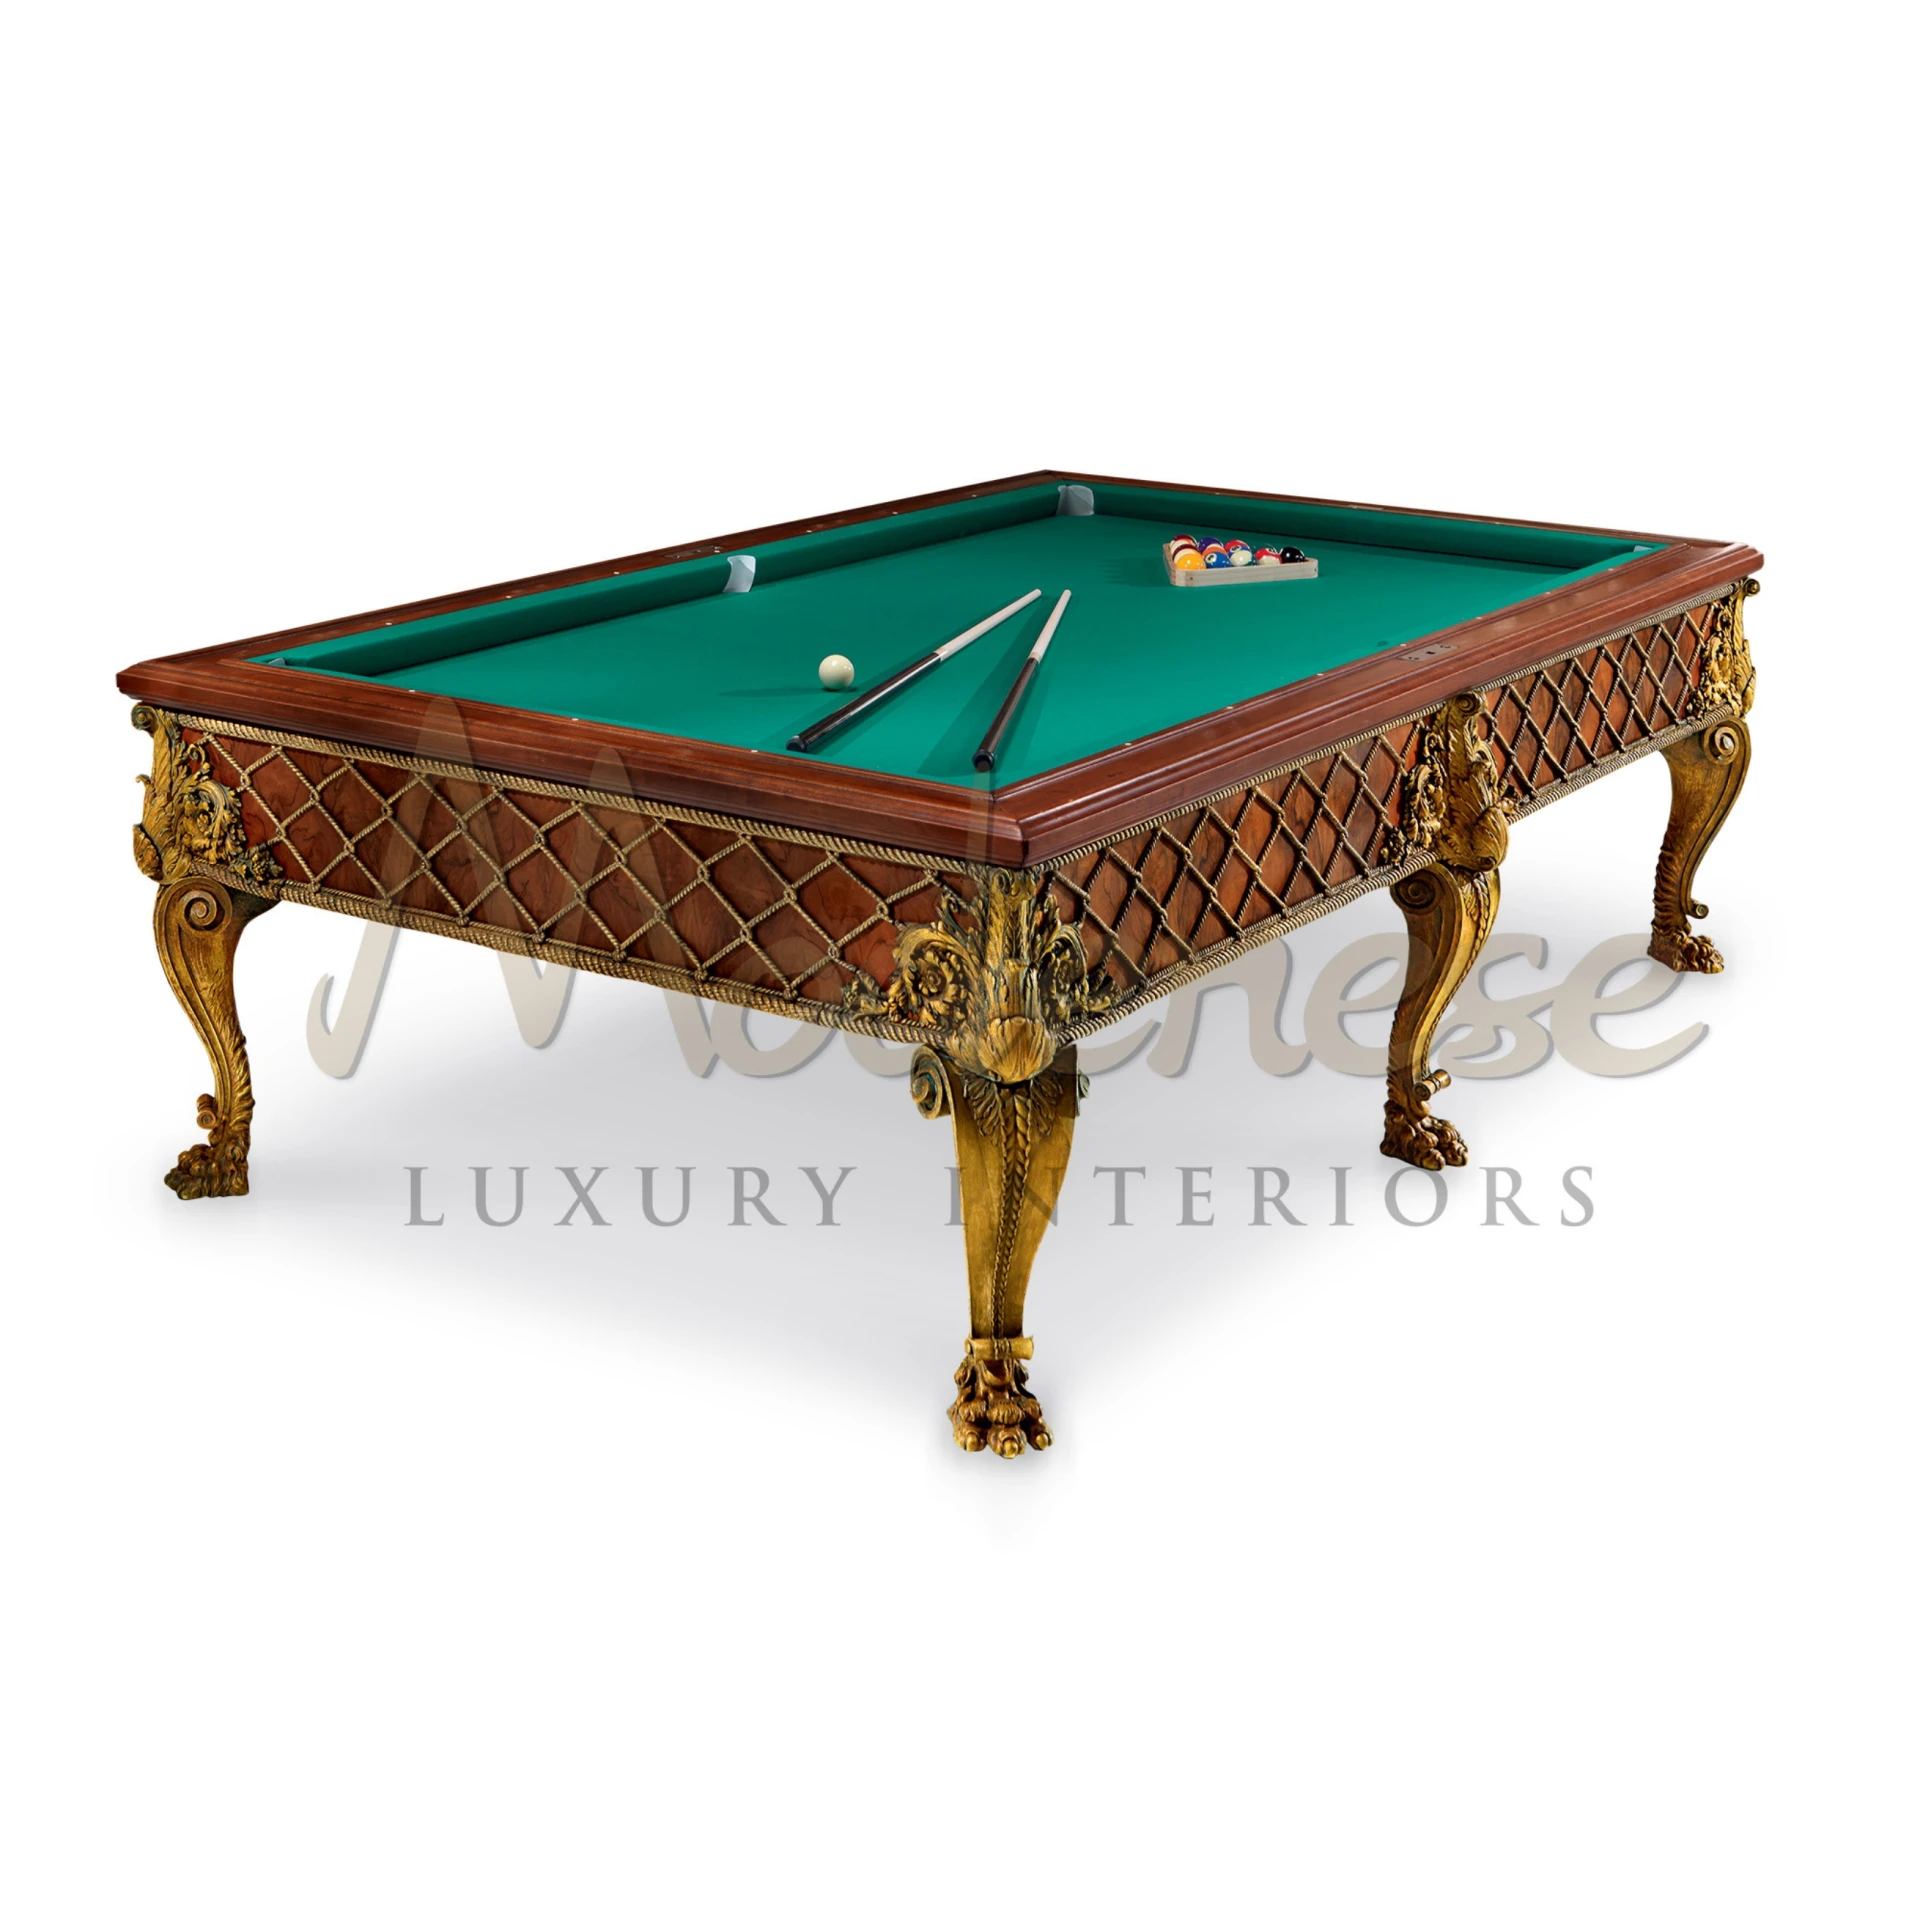 High-quality oak Classic Wooden American Pool table, ideal for eight-ball enthusiasts seeking durability and classic design.